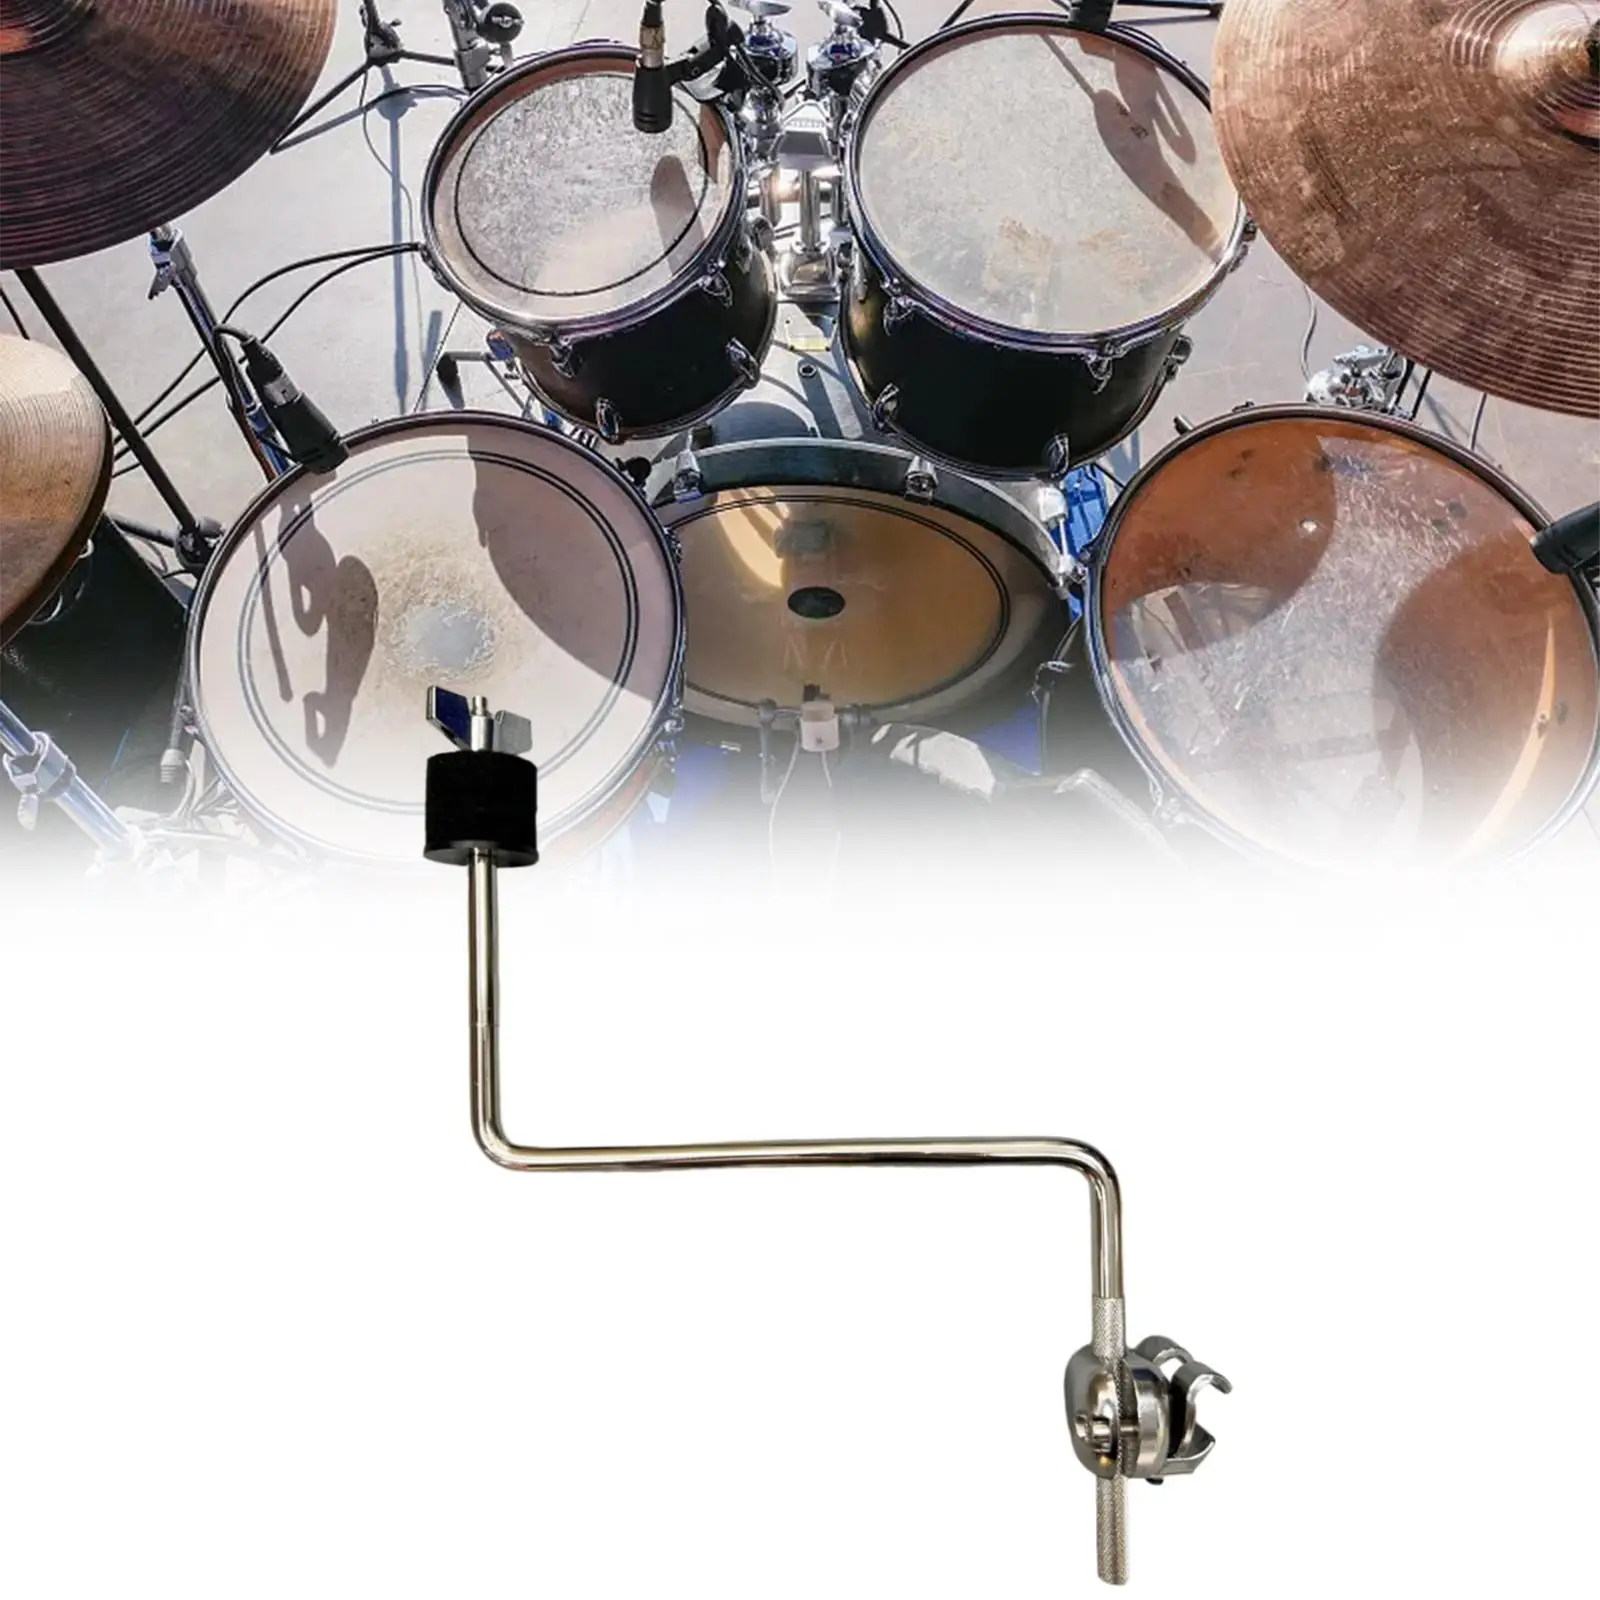 Cymbal Mount Adjustable Strong Easy to Install Accessories Replacements Drum Clamp Holder Cymbal Expand Arm Cymbal Stands Clips